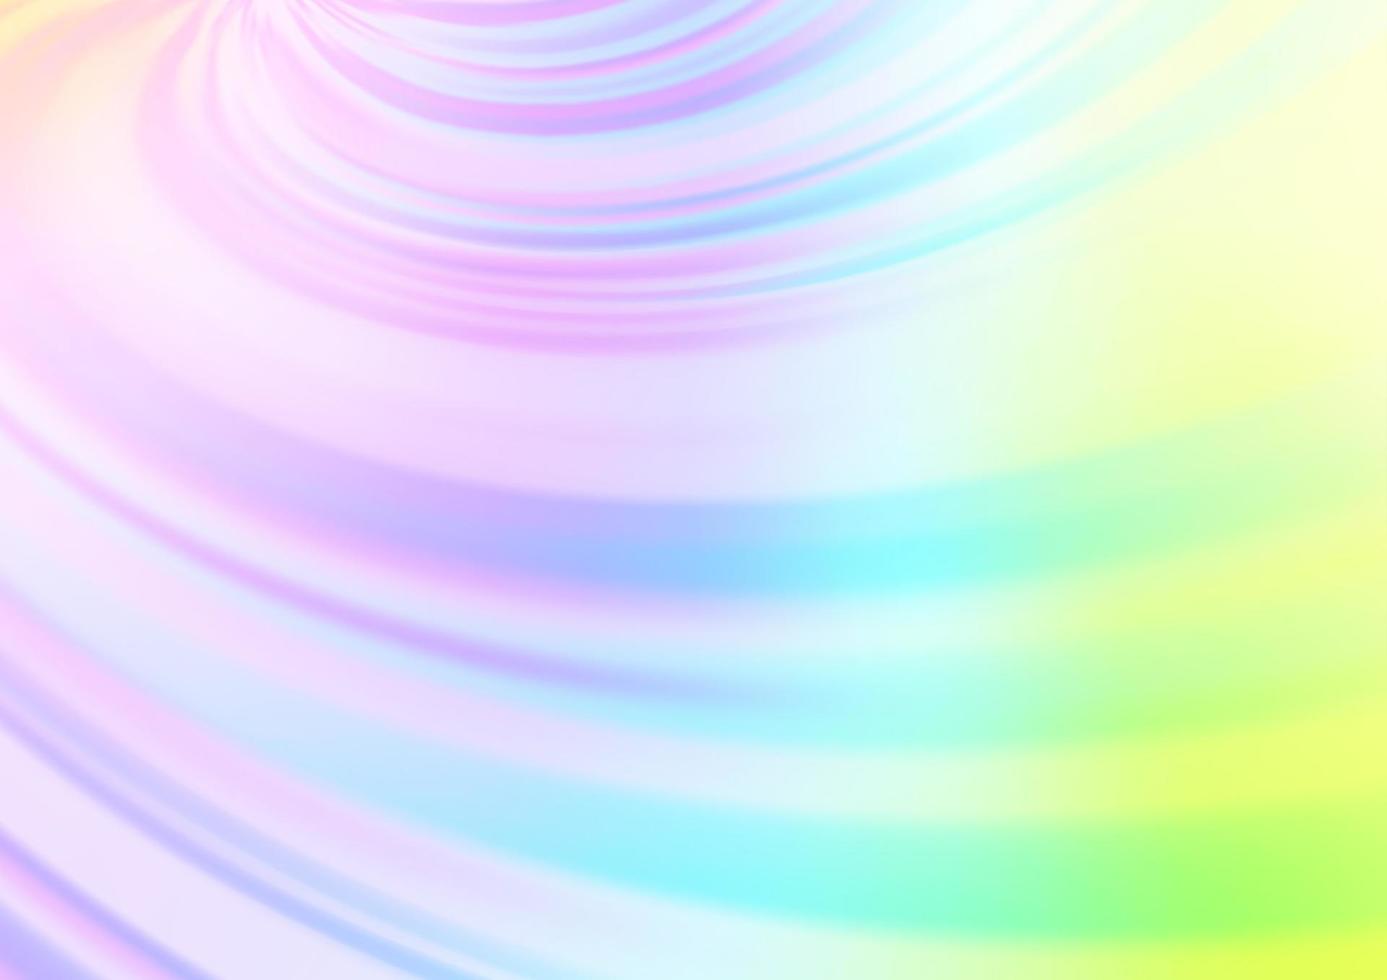 Light Multicolor, Rainbow vector abstract blurred background.